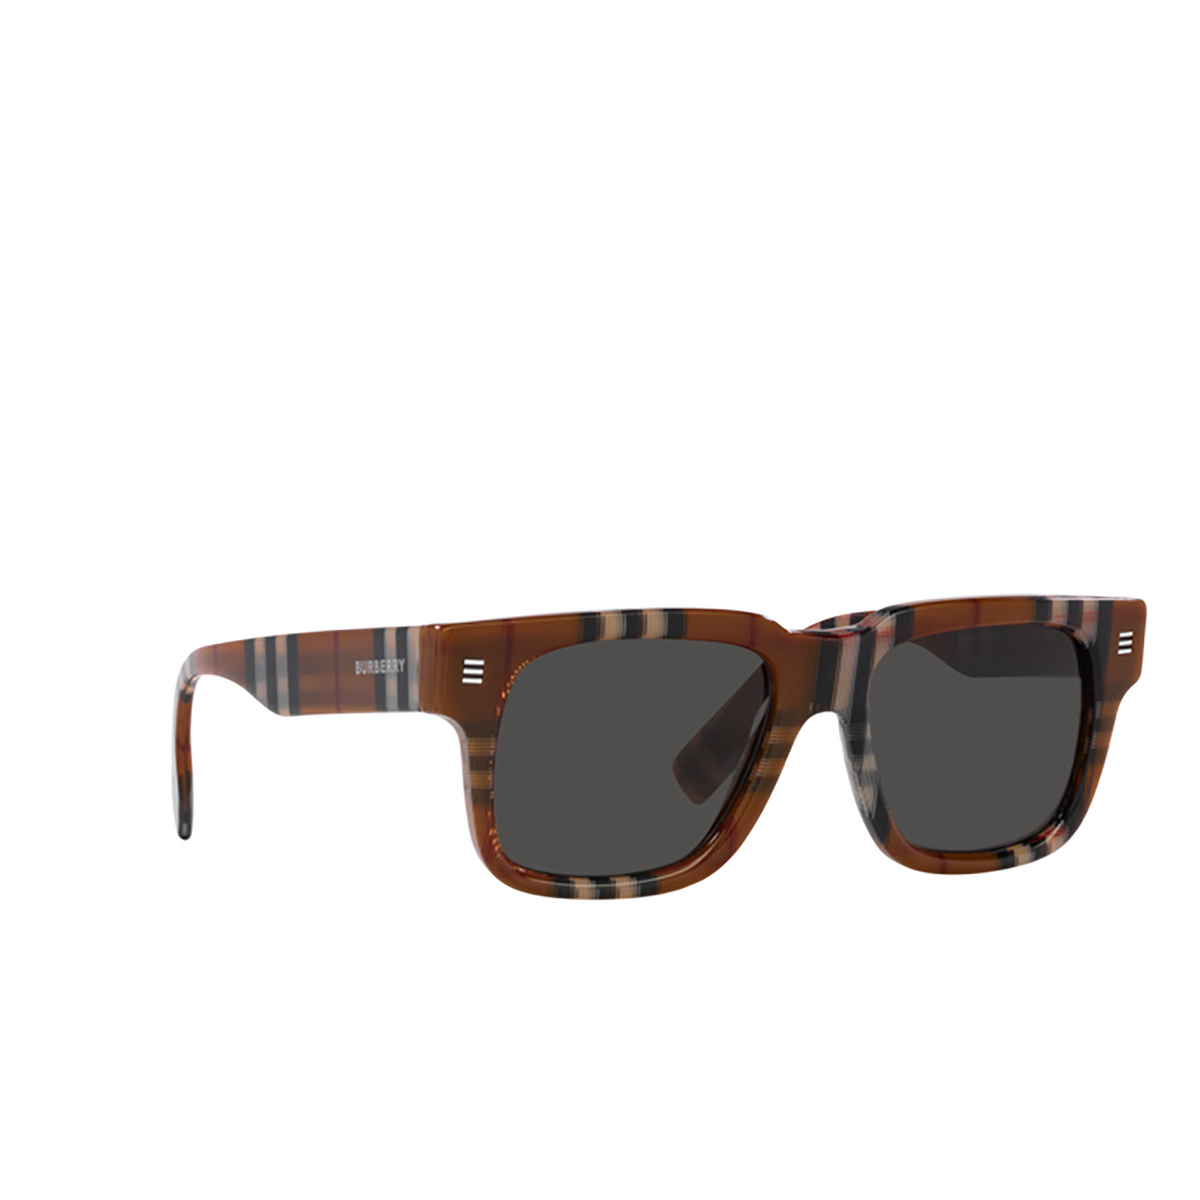 Burberry HAYDEN Sunglasses 396687 Check Brown - three-quarters view